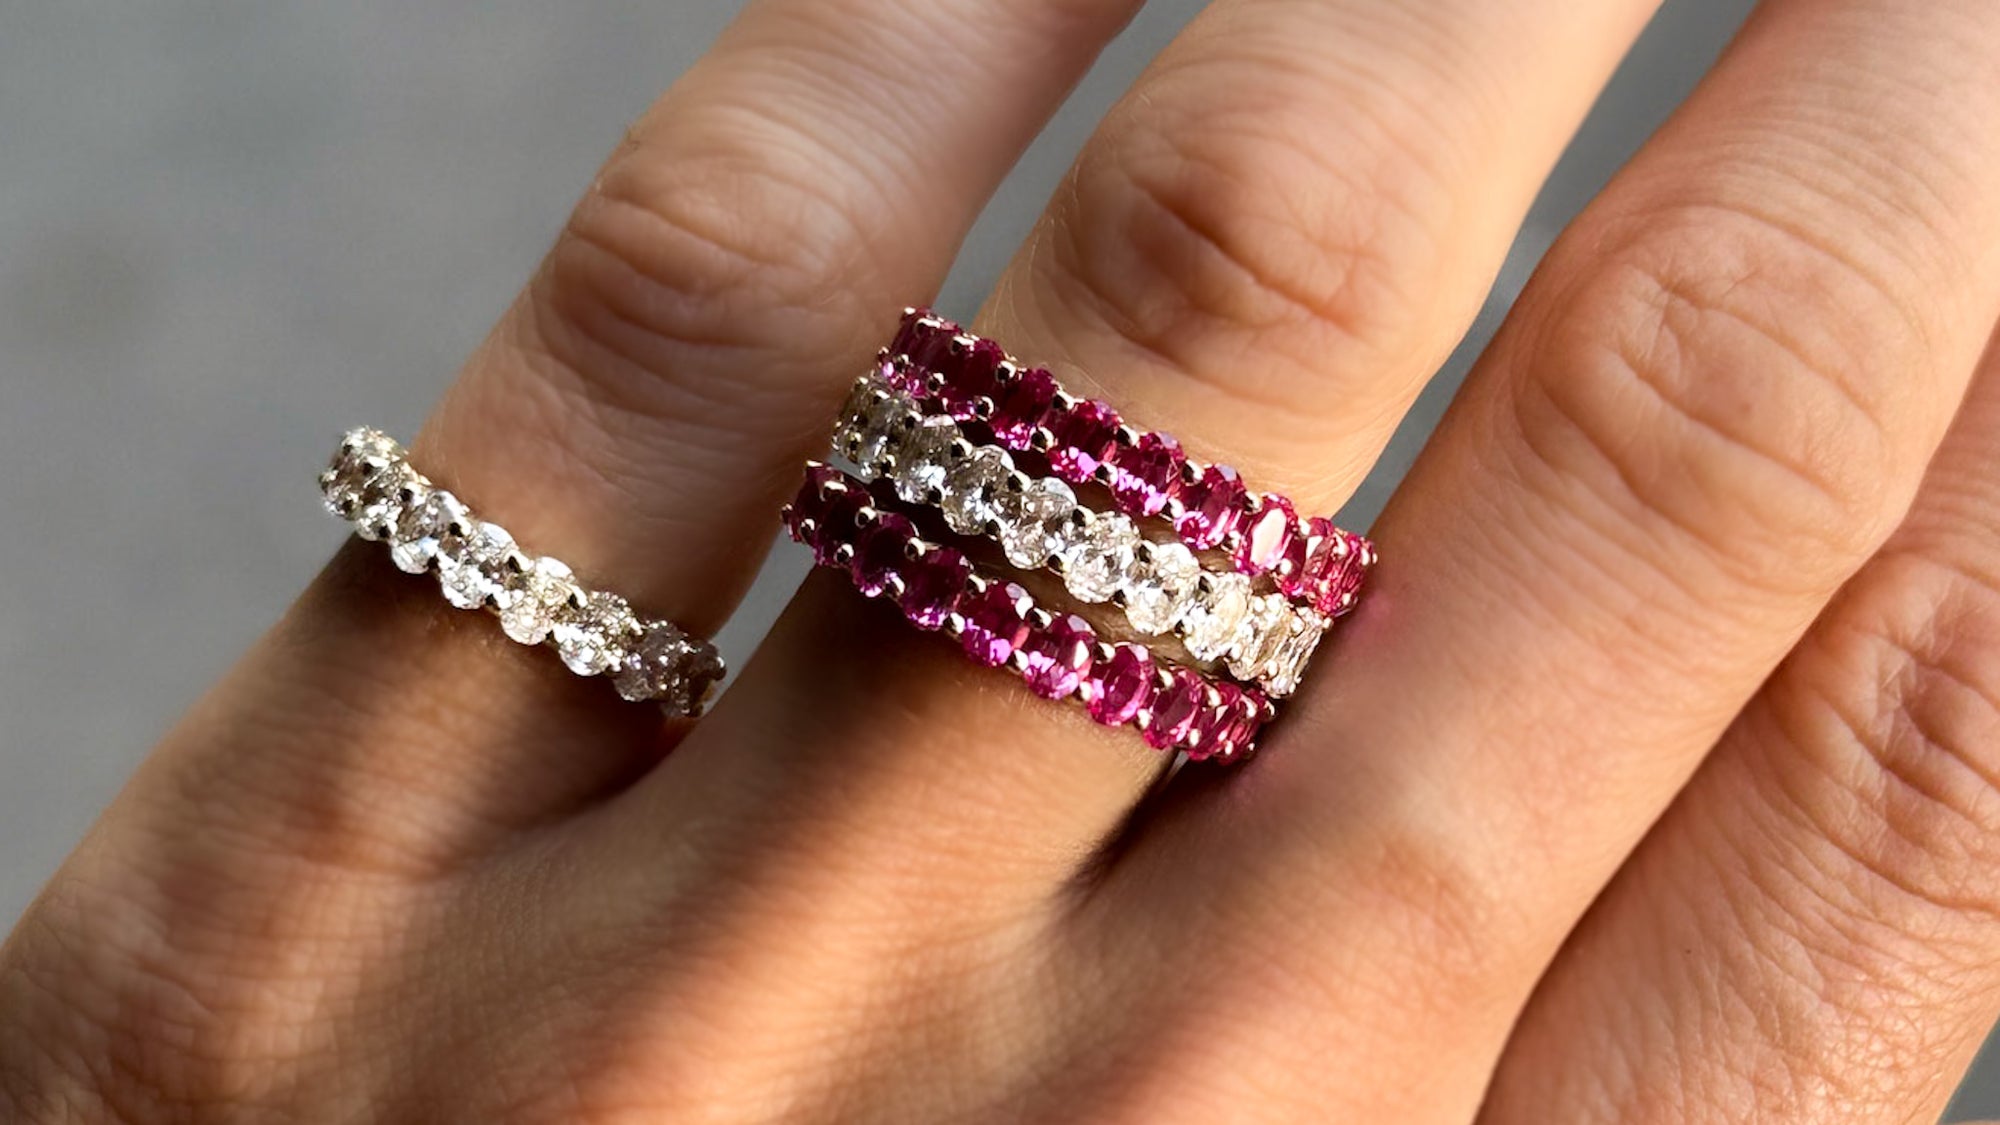 Small Sparkle: The Dainty Diamond Rings You Need Now